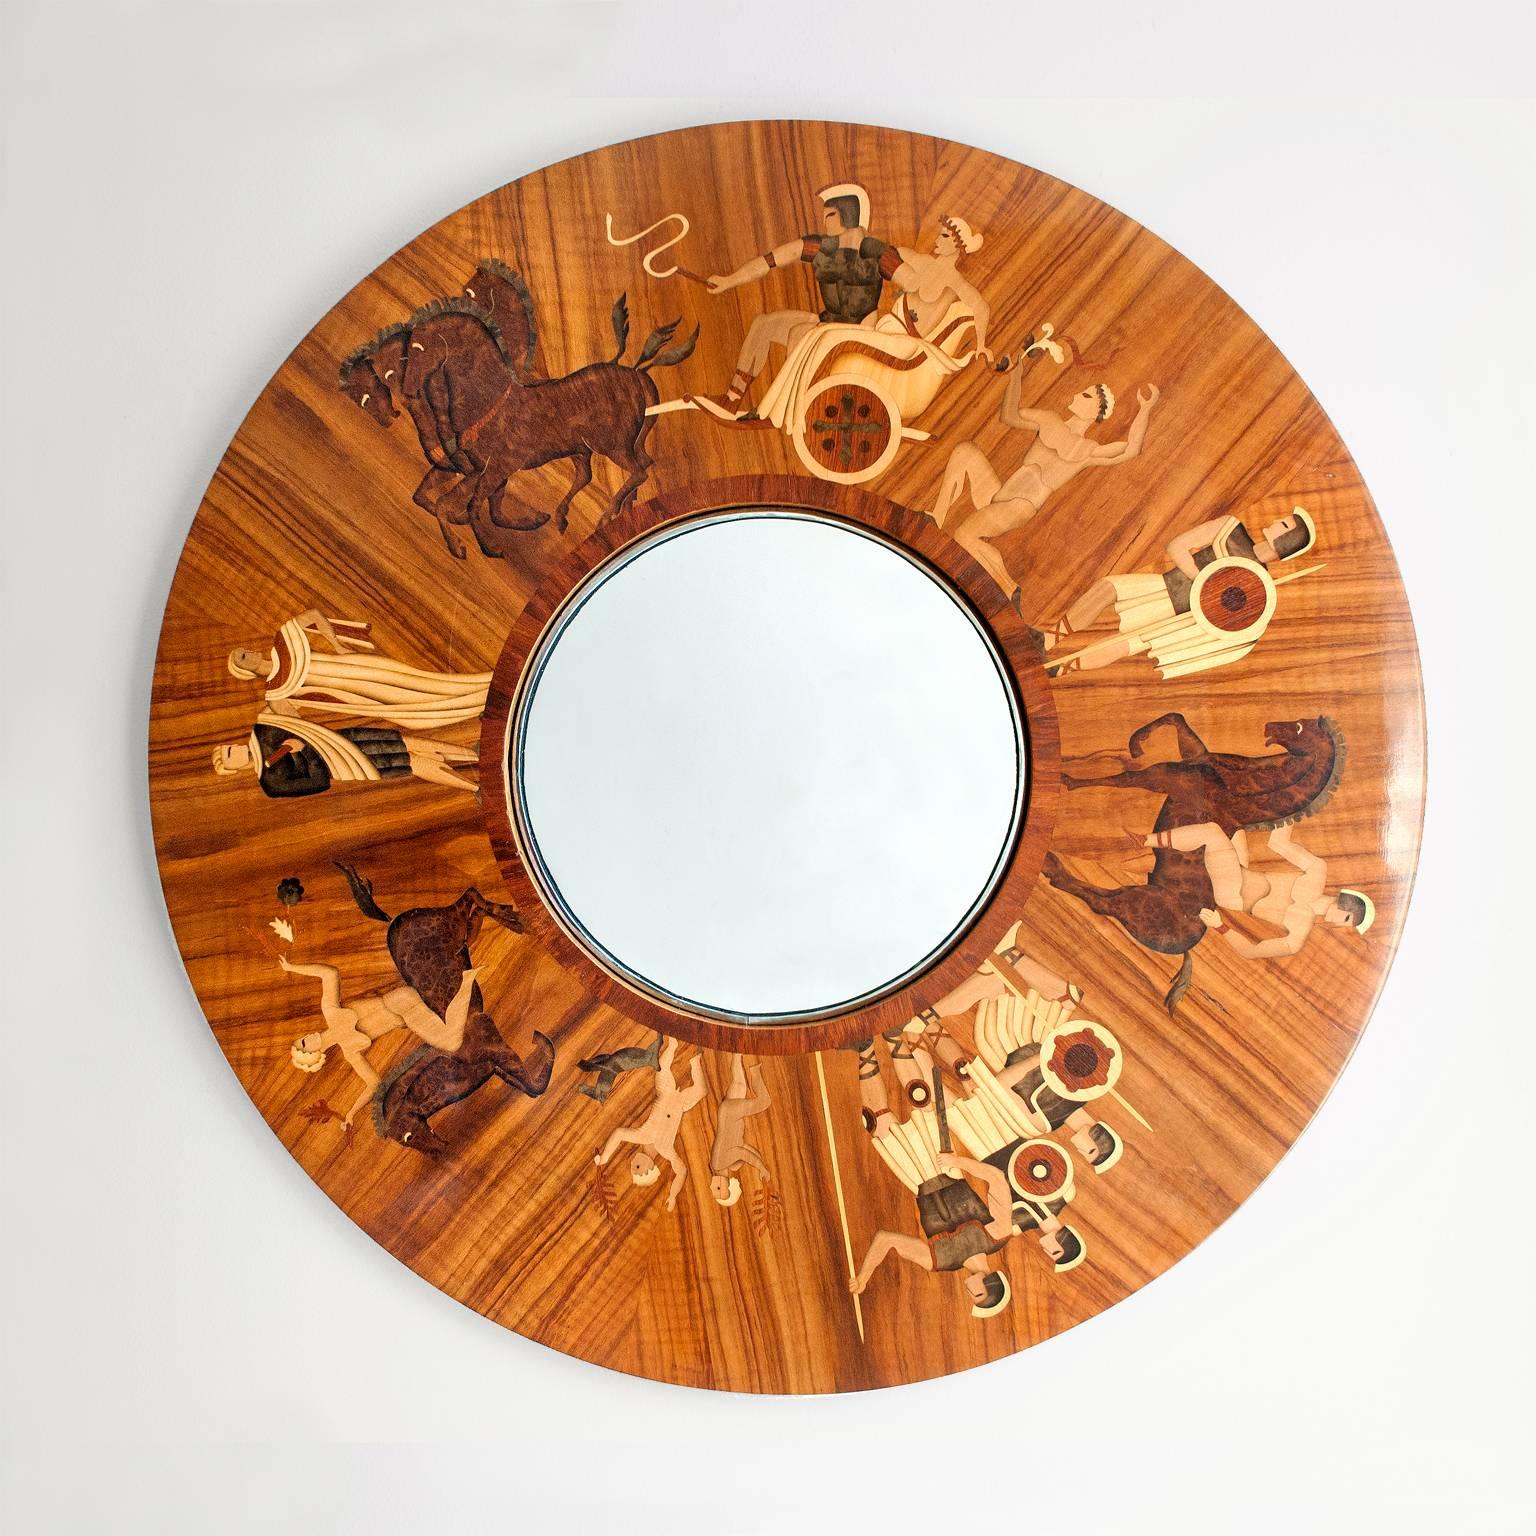 Delightful figural wood marquetry Art Deco wall mirror made in Sweden by Mjolby Intarsia and designed by Birger Ekman. Mjolby Intarsia was renowned for its brilliant marquetry craftsmanship. The firm also provided work for NK in Stockholm and were